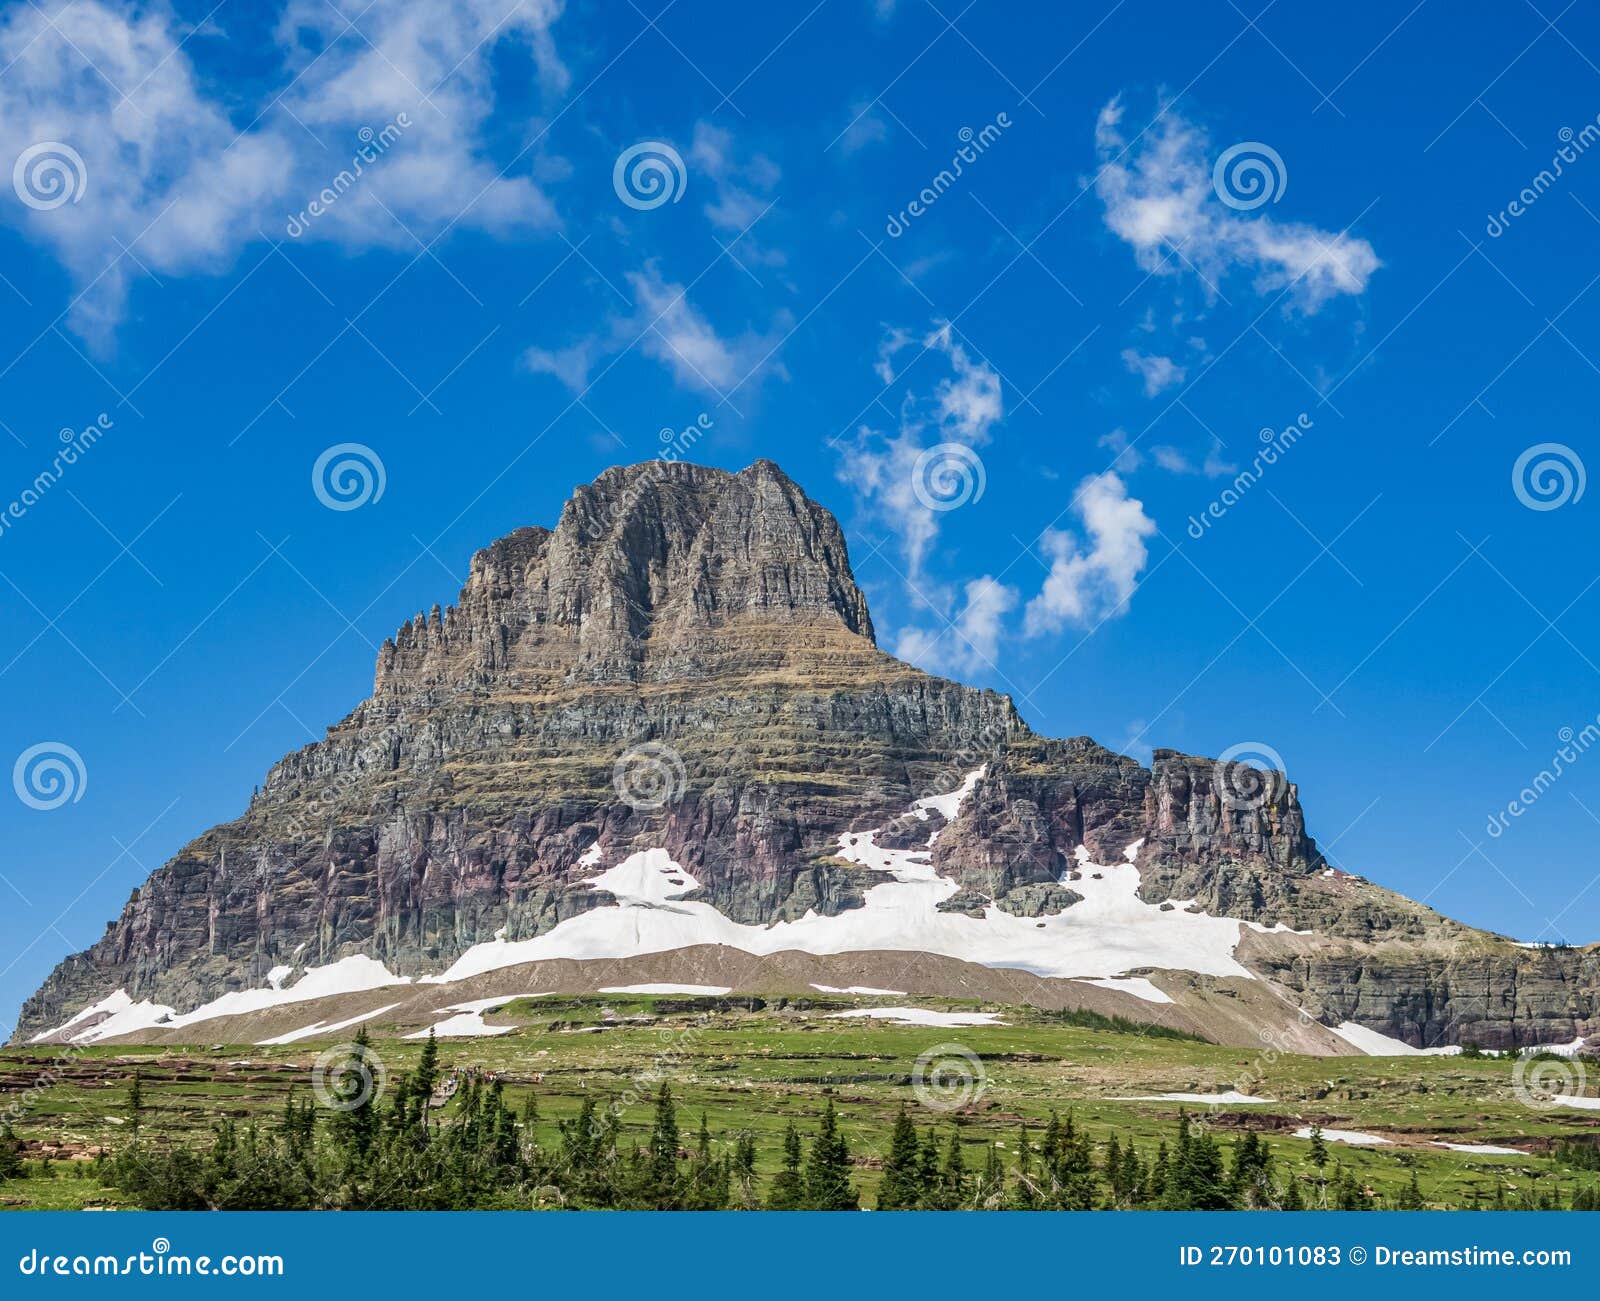 clements mountain in montana usa